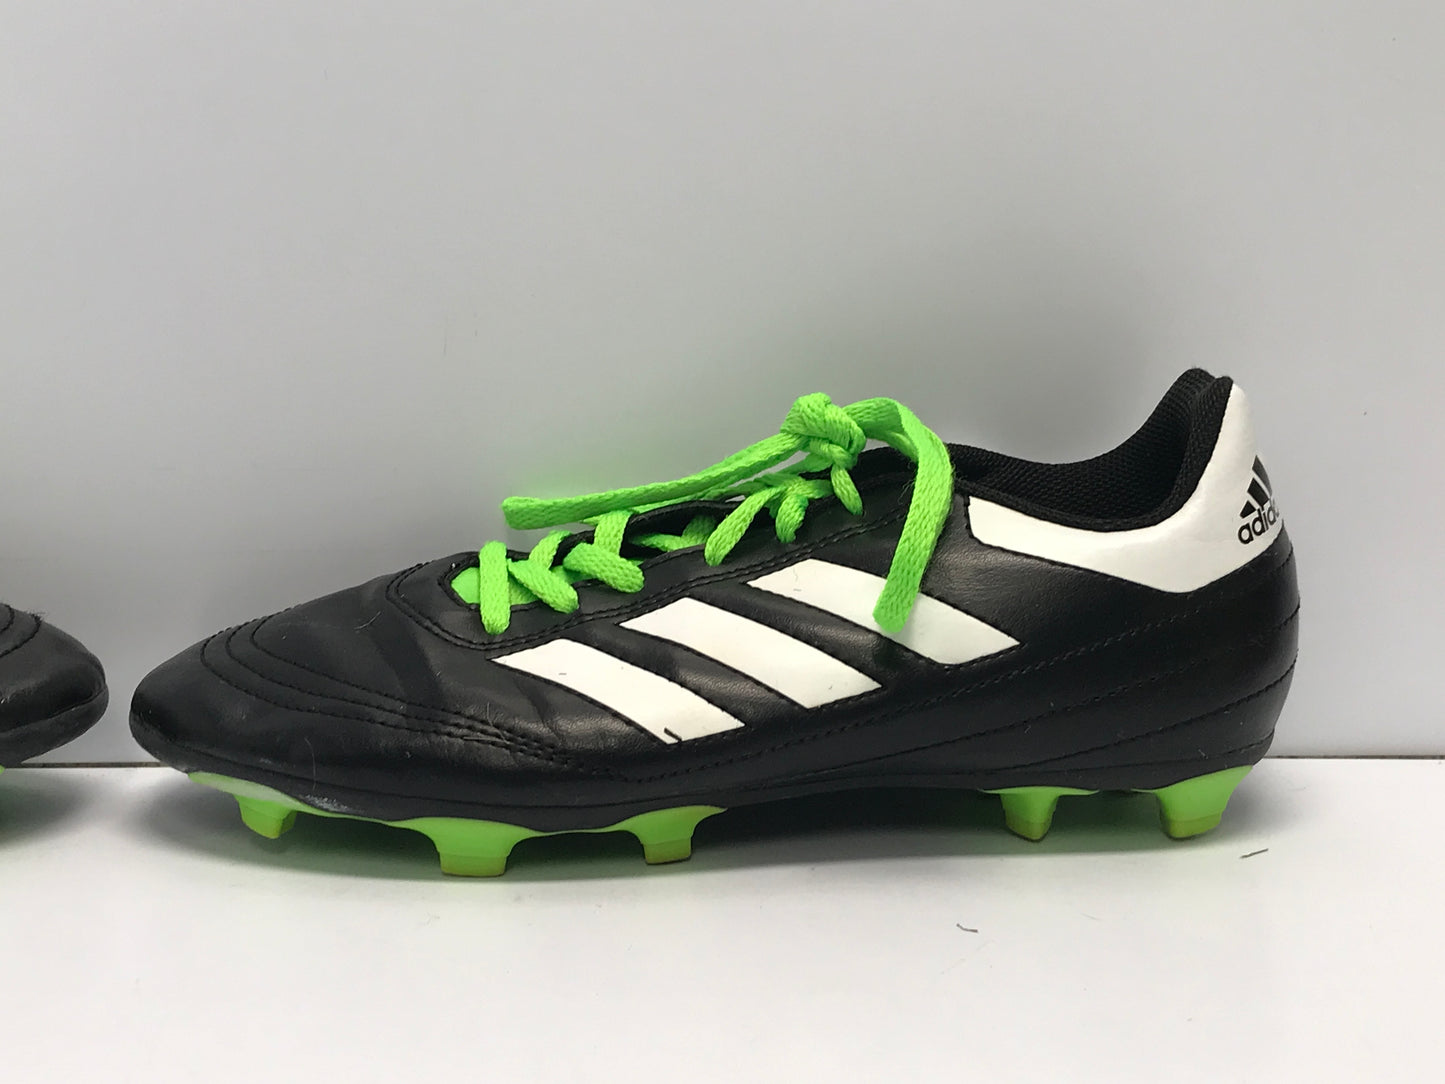 Soccer Shoes Cleats Men's Size 6 Adidas Black White Lime